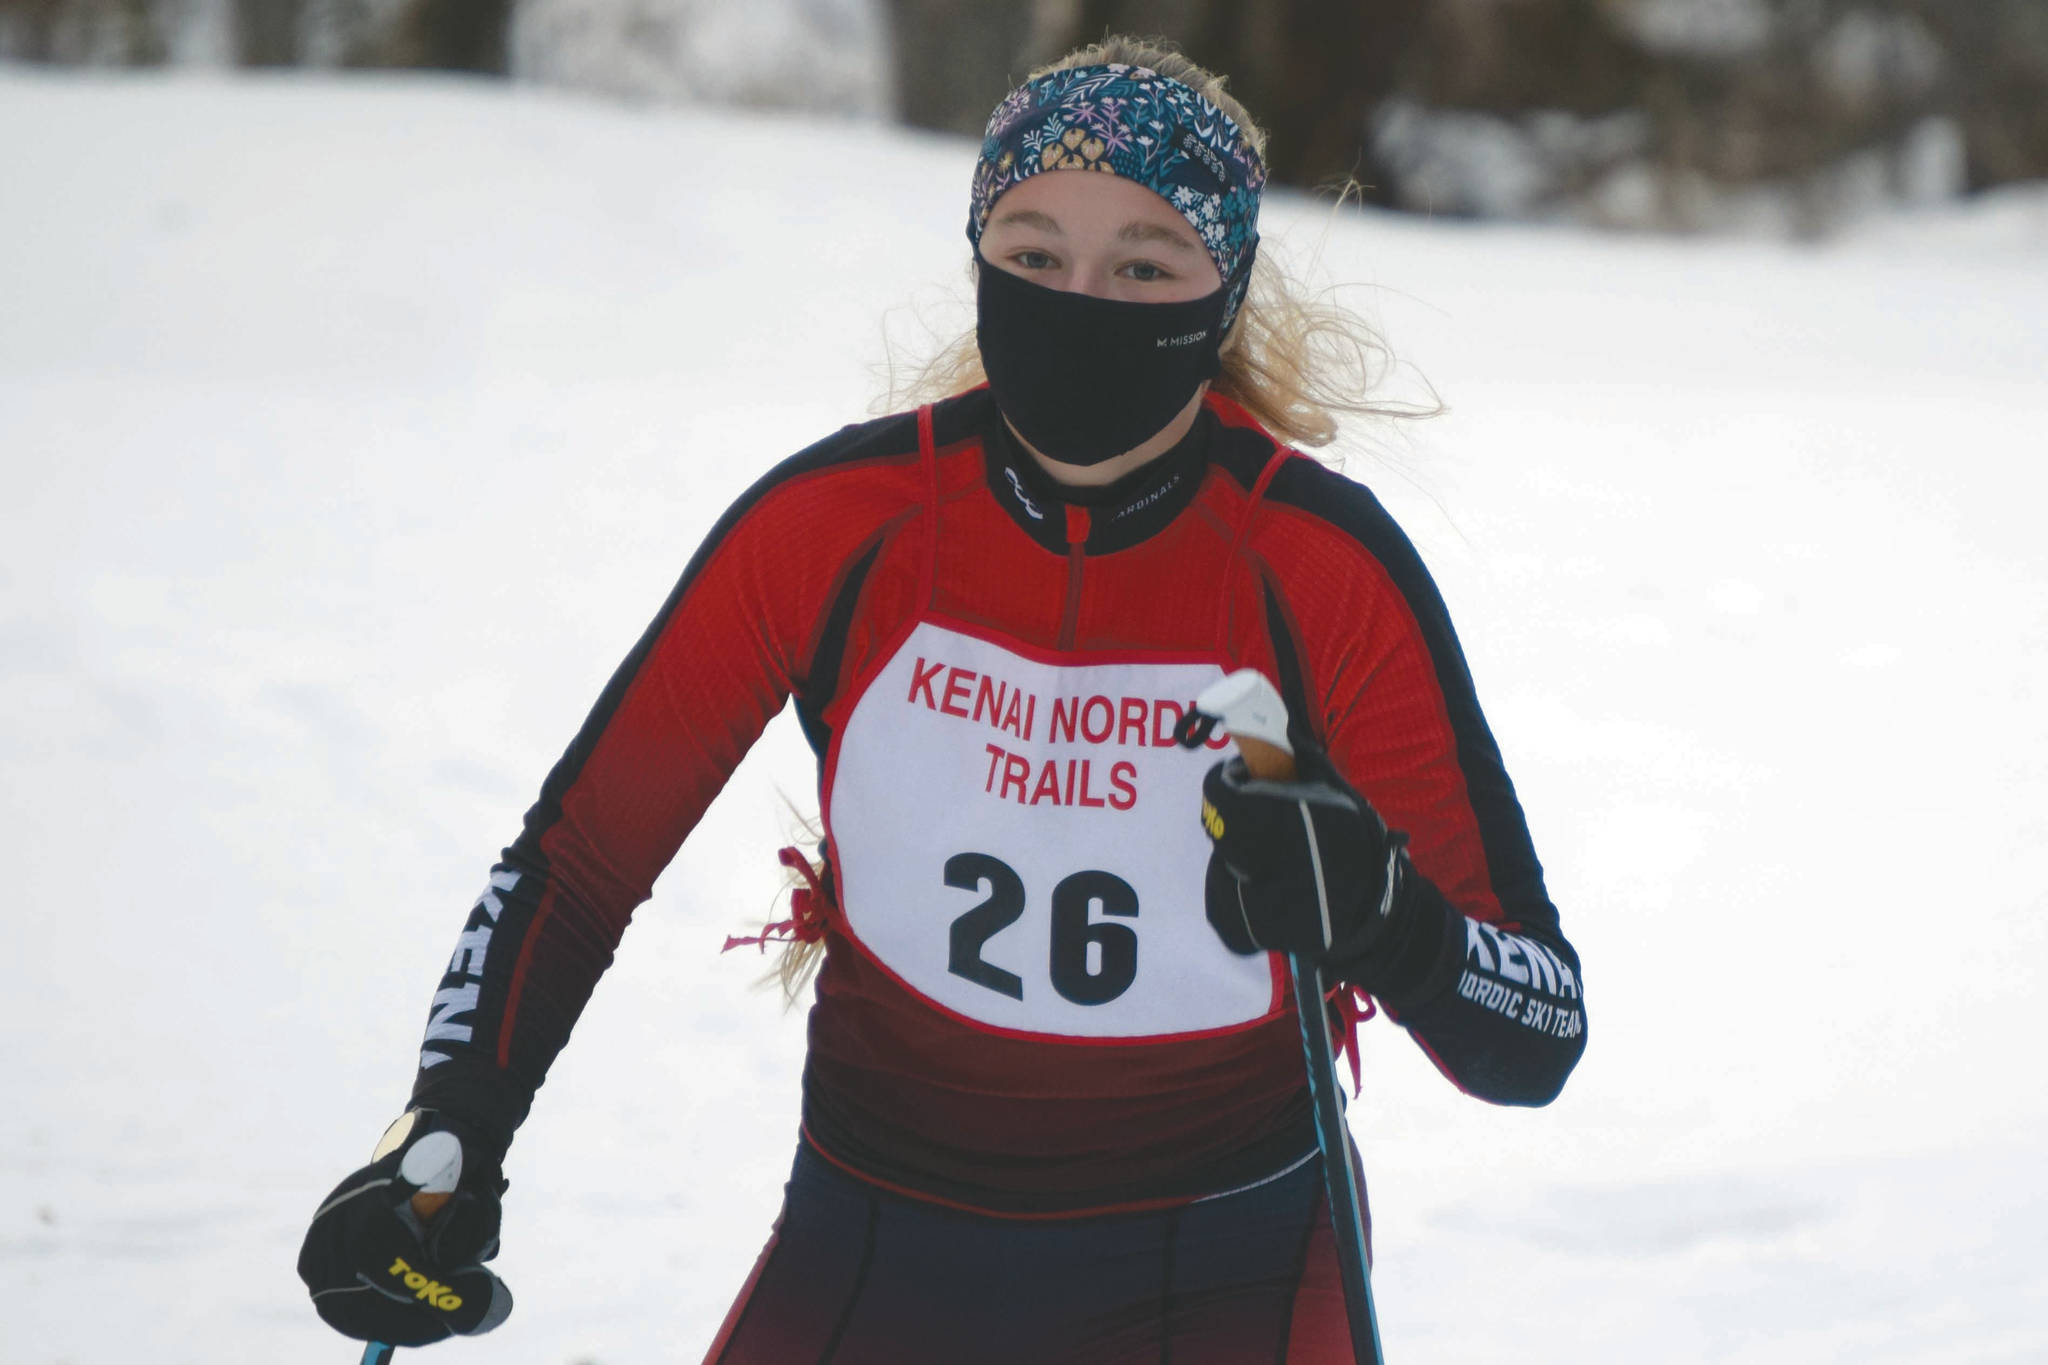 Kenai Central's Emily Moss takes the victory in the girls race at the Kenai Nordic Trails on Saturday, Jan. 16, 2021, at Kenai Golf Course. (Photo by Jeff Helminiak)